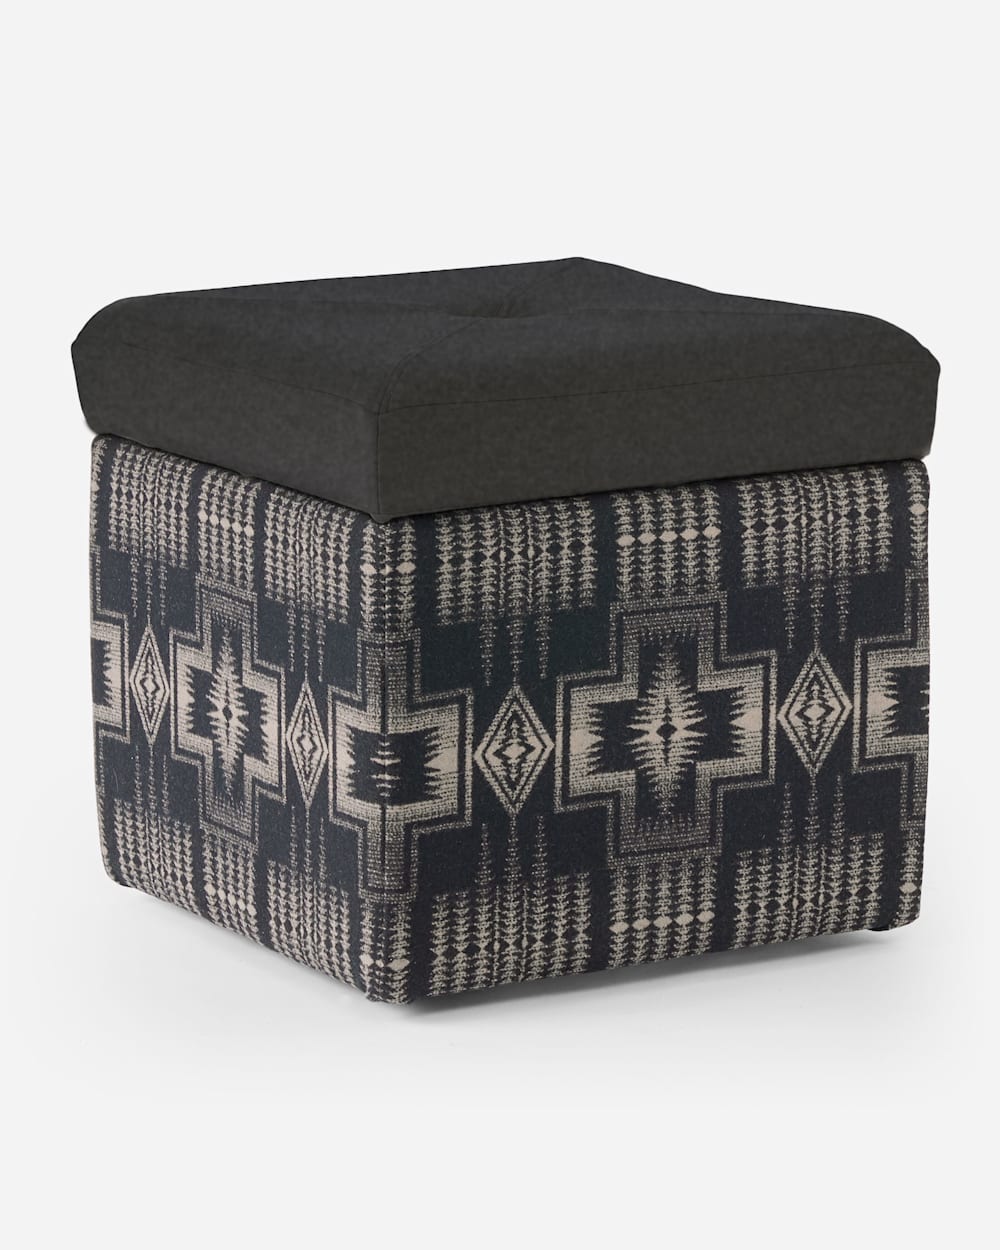 FANNIE KAY STORAGE OTTOMAN IN CHARCOAL/HARDING BLACK image number 1